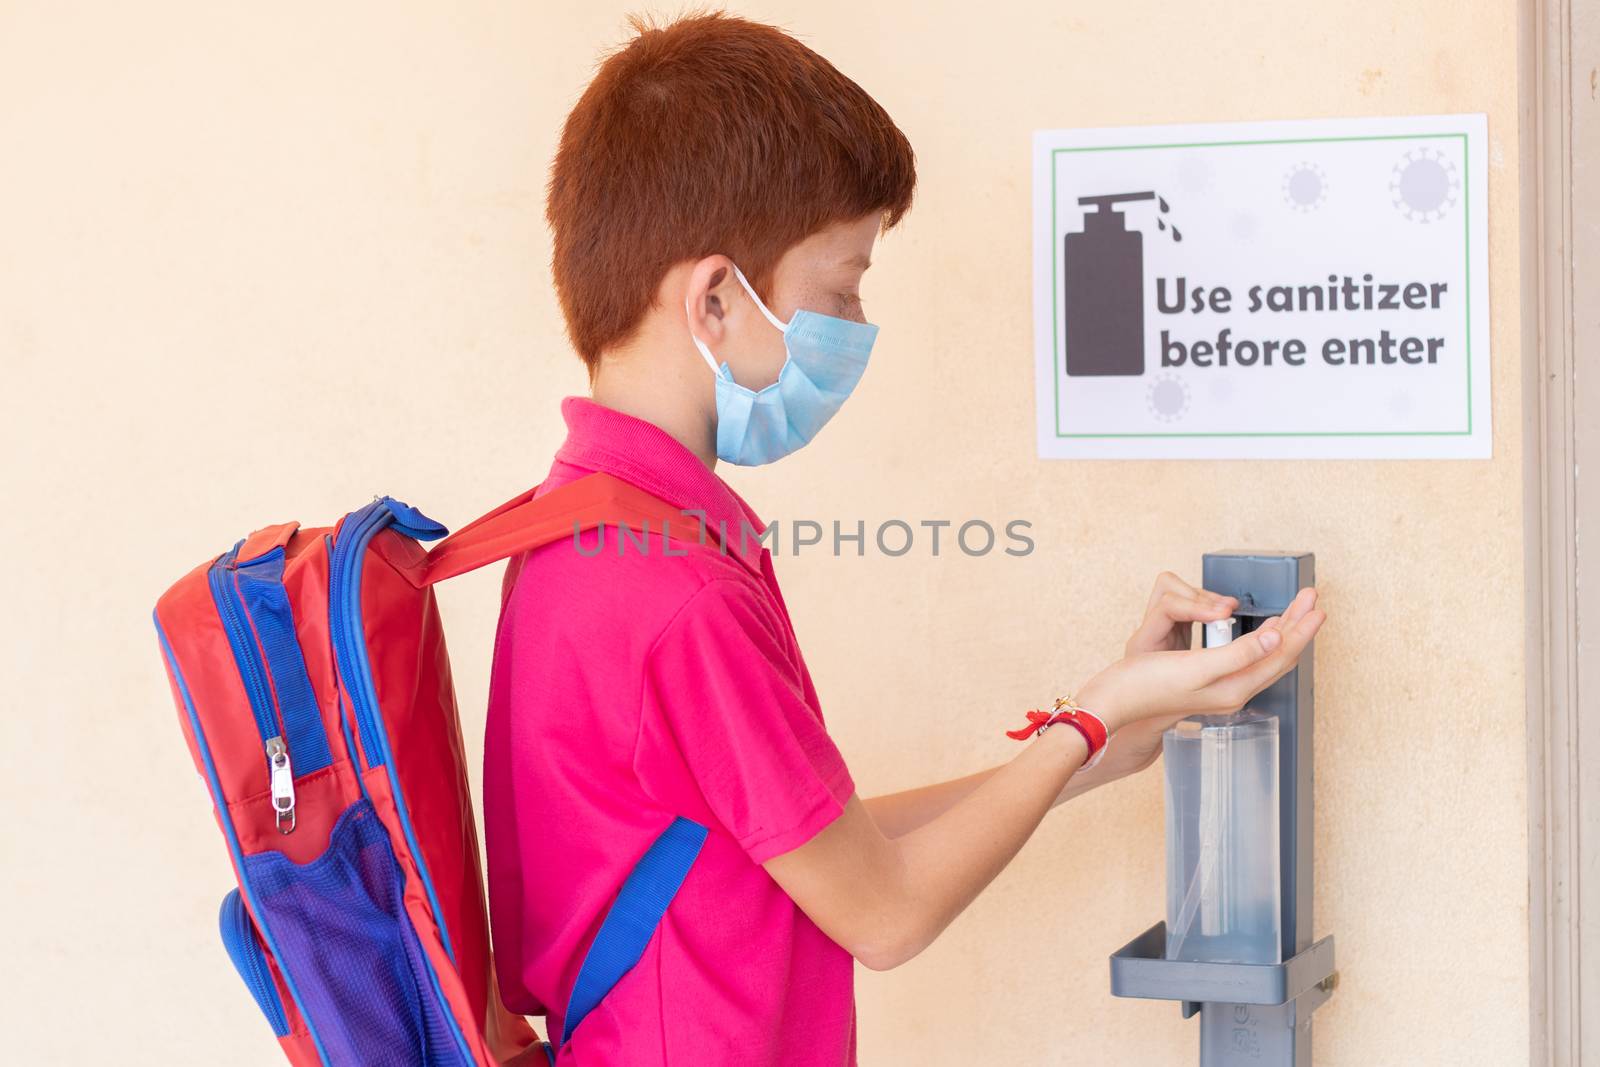 Kid with medical mask using hand sanitizer before entering classroom - concept of back to school or school reopen and coronavirus or covid-19 safety measures.